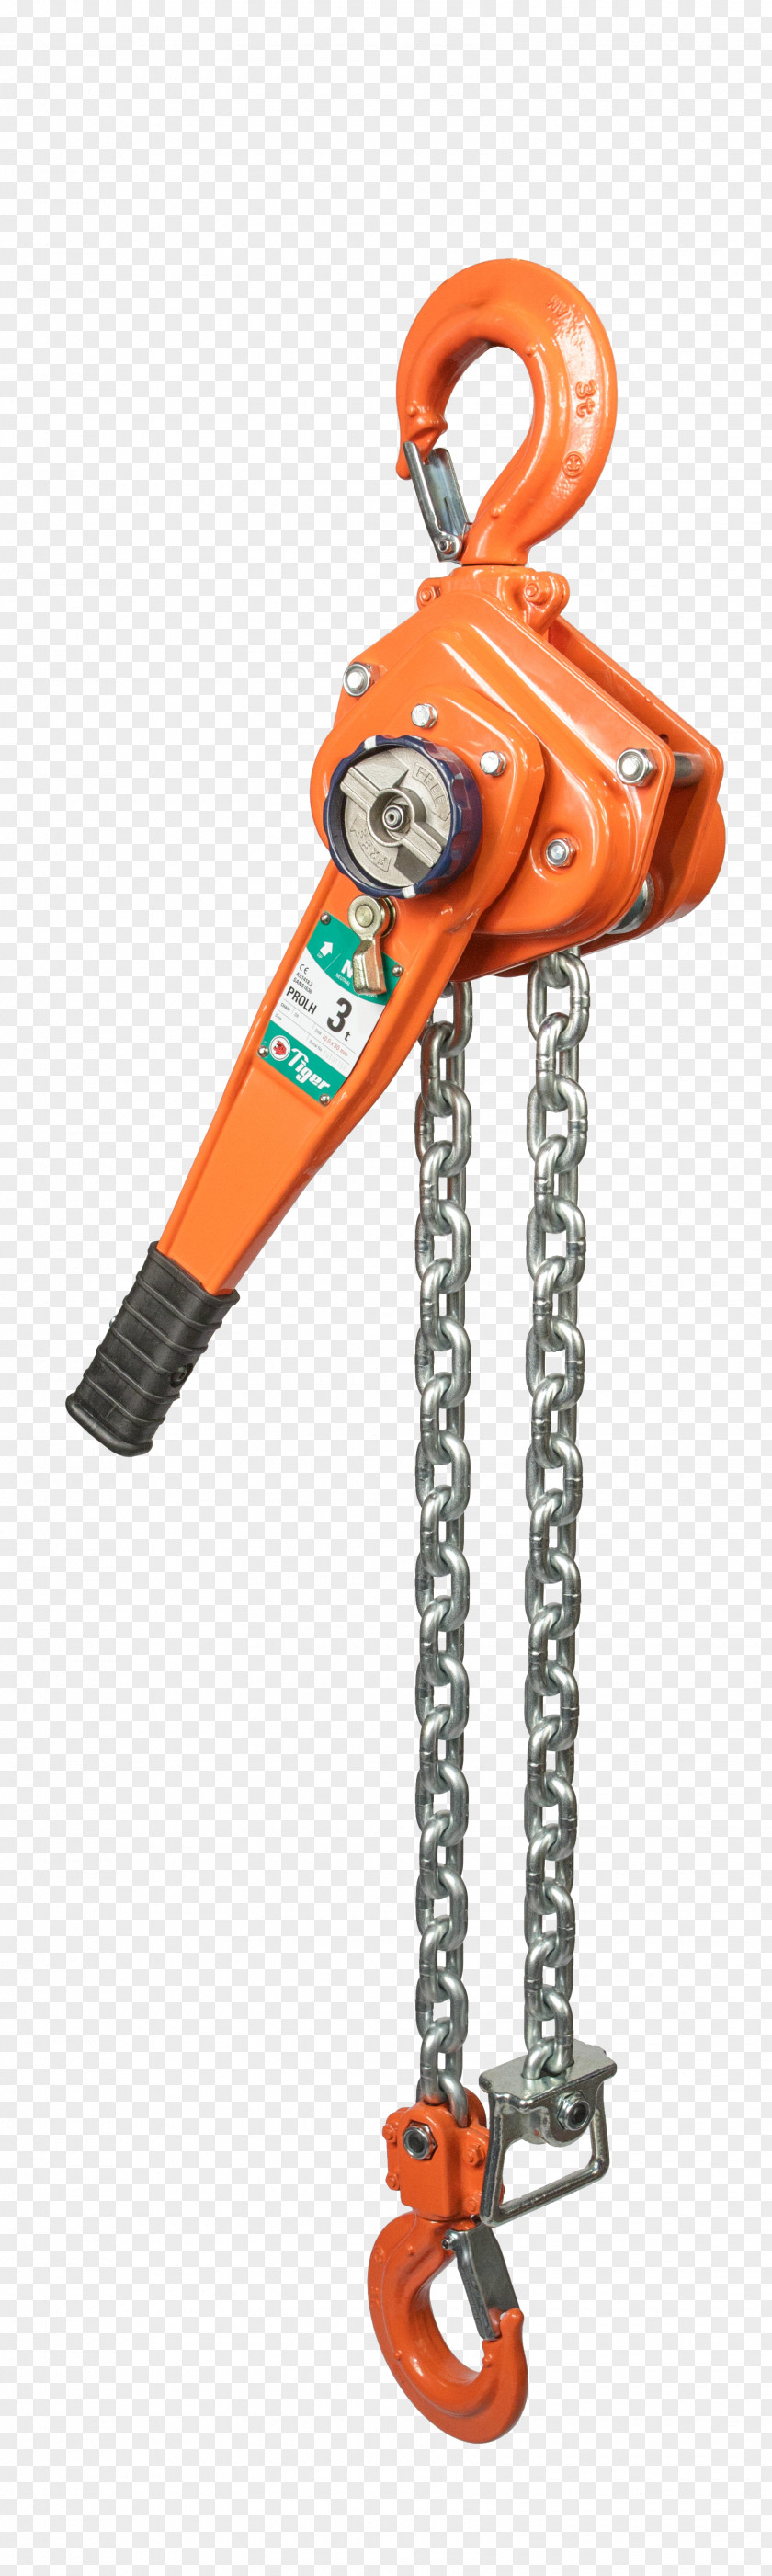 Hoisting Machine Hoist Industry Chain Pulley PNG